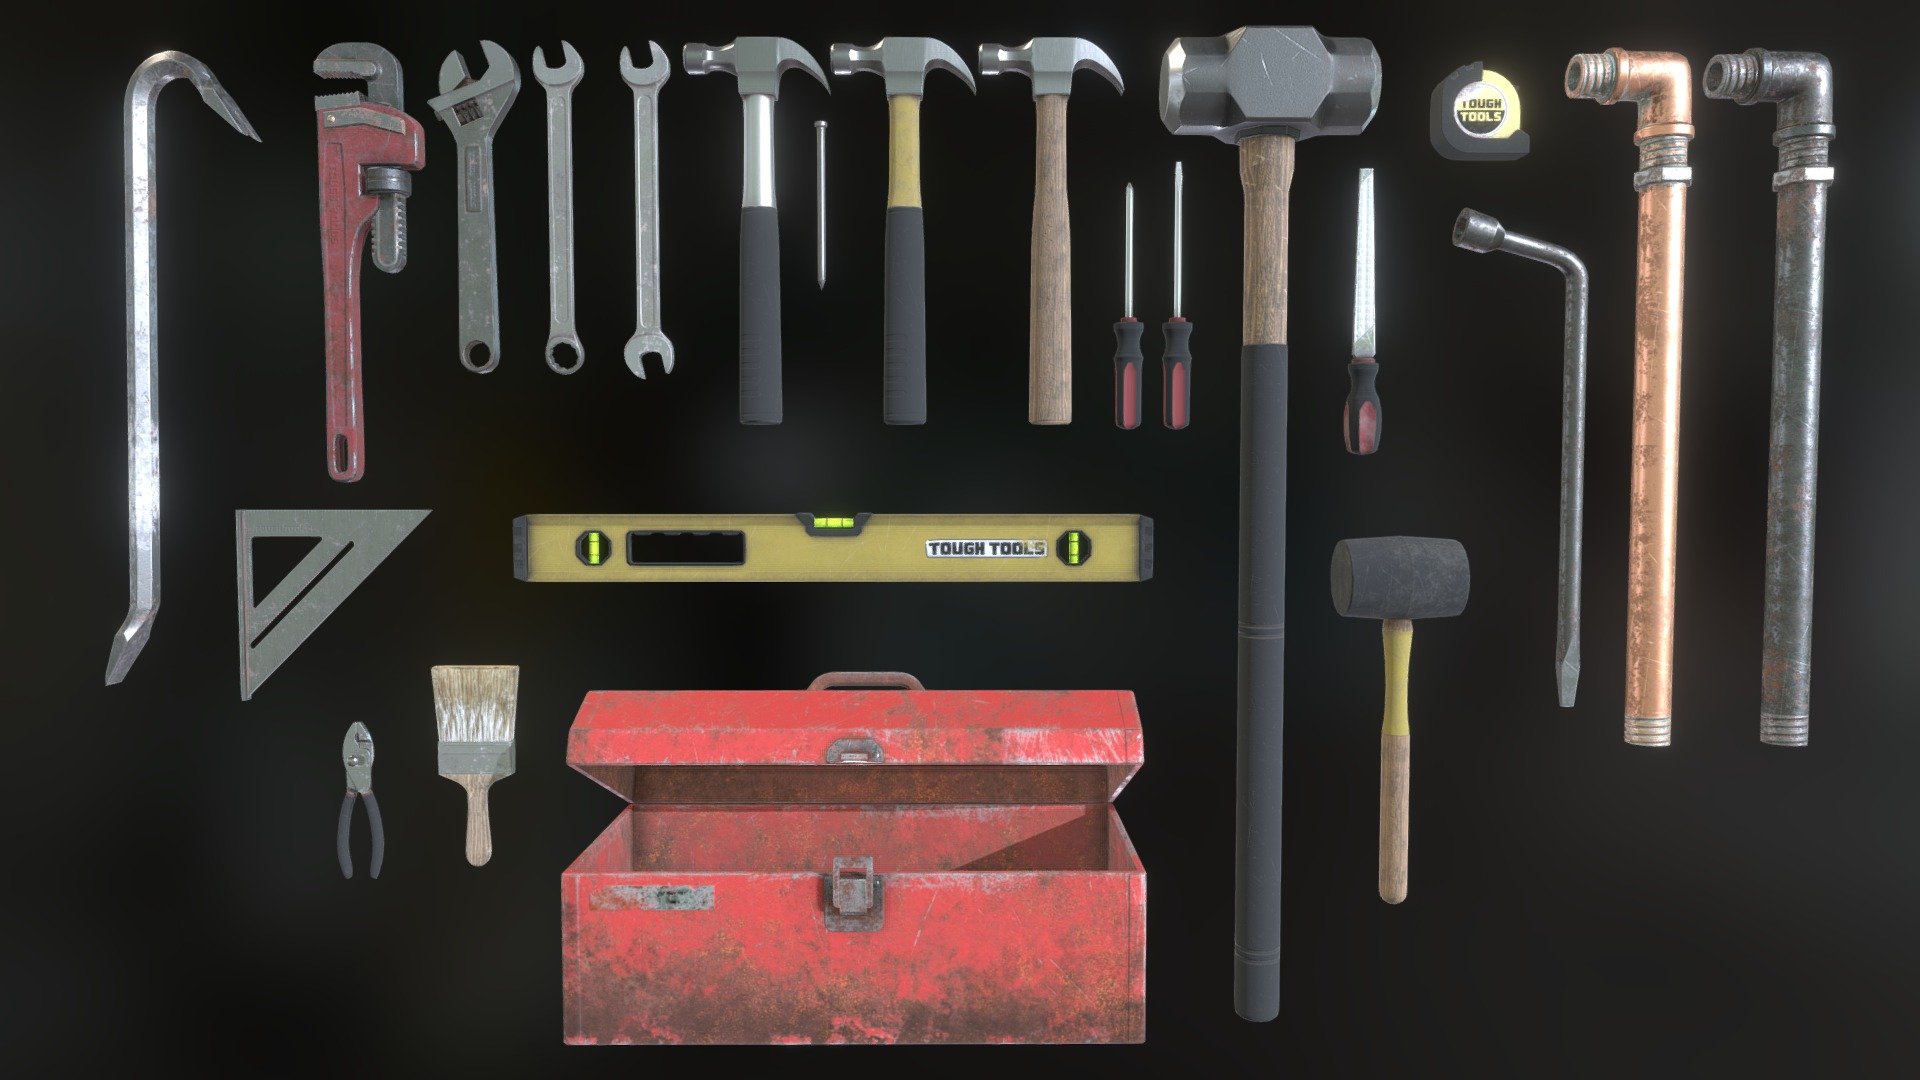 Toolset - Common Household Weapoons
A Set of 20 Tools.  One set in a series, Common Household Weapons.  Hero Assets designed for melee combat or generic decoration.
Available soon on the Unity Asset Store.
Set Contains 3 Levels of Wear for each tool.  Hammer and Pipe models have alternate textures.  Contains 93 Prefabs and 81 Texture Sets plus 21 Alternates with Sudo Logos and 17 Mesh Maps.
* Pipe
* Crowbar
* Pipe Wrench
* Crescent Wrench
* Combination Wrench
* Open-Ended Wrench
* Hammer
* Six Inch Nail
* Philips Head Screwdriver
* Flathead Screwdriver
* Sledge Hammer
* Mill File
* Tape Measure
* Tire Wrench
* Rubber Mallet
* Square Tool
* Level
* Slip Joint Pliers
* Paint Brush
* Tool Box - Toolset Sketchfab - 3D model by Trikery 3d model